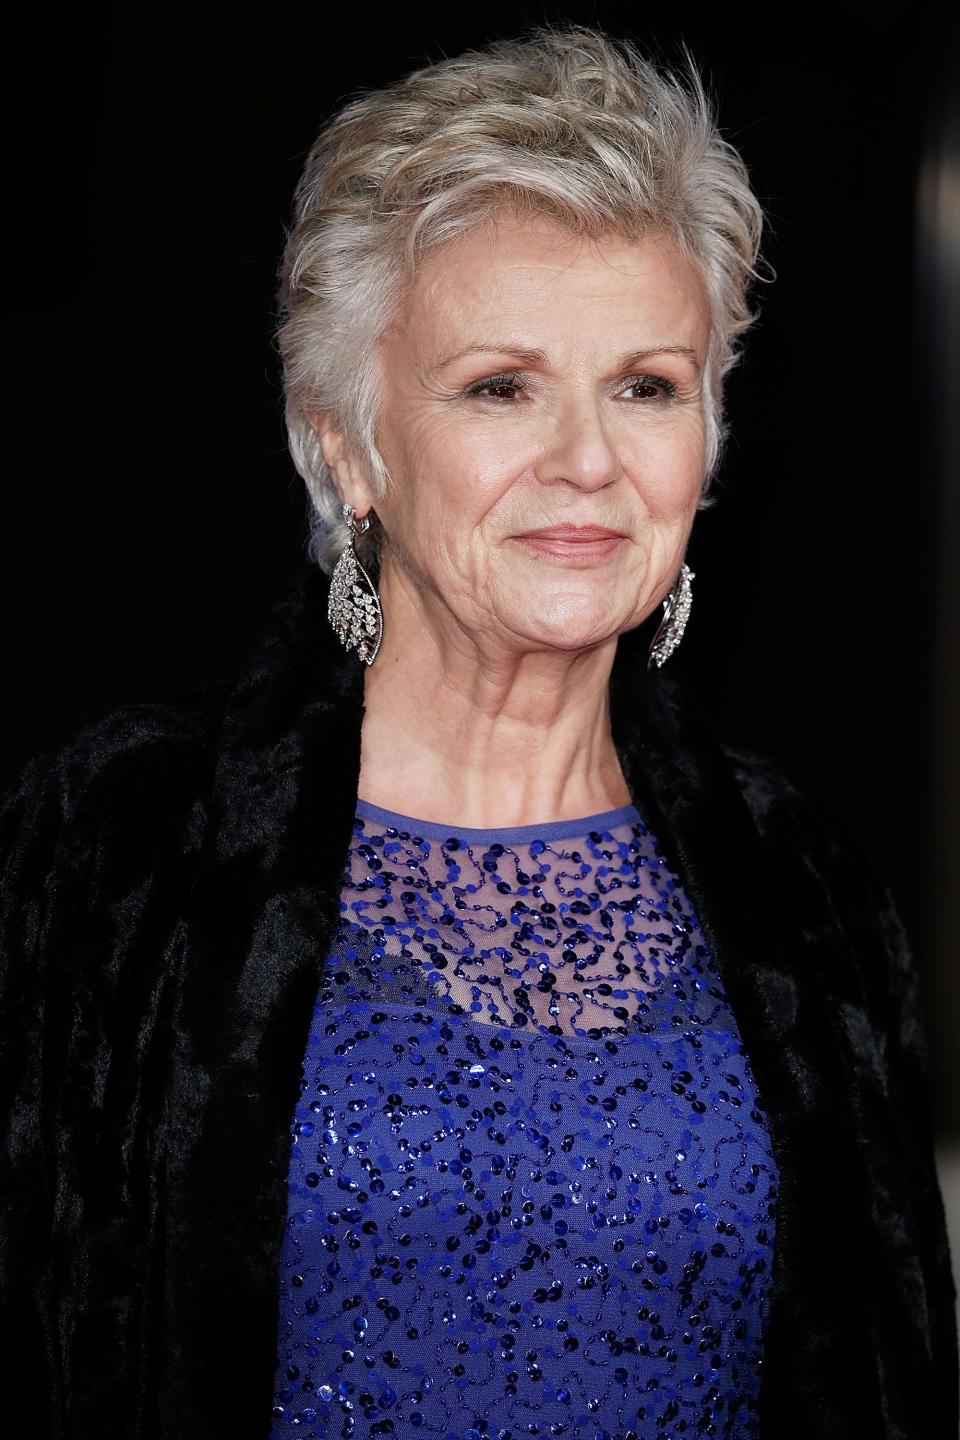 Julie Walters attends the official After Party Dinner for the EE British Academy Film Awards at The Grosvenor House Hotel on Feb. 14, 2016 in London, England.